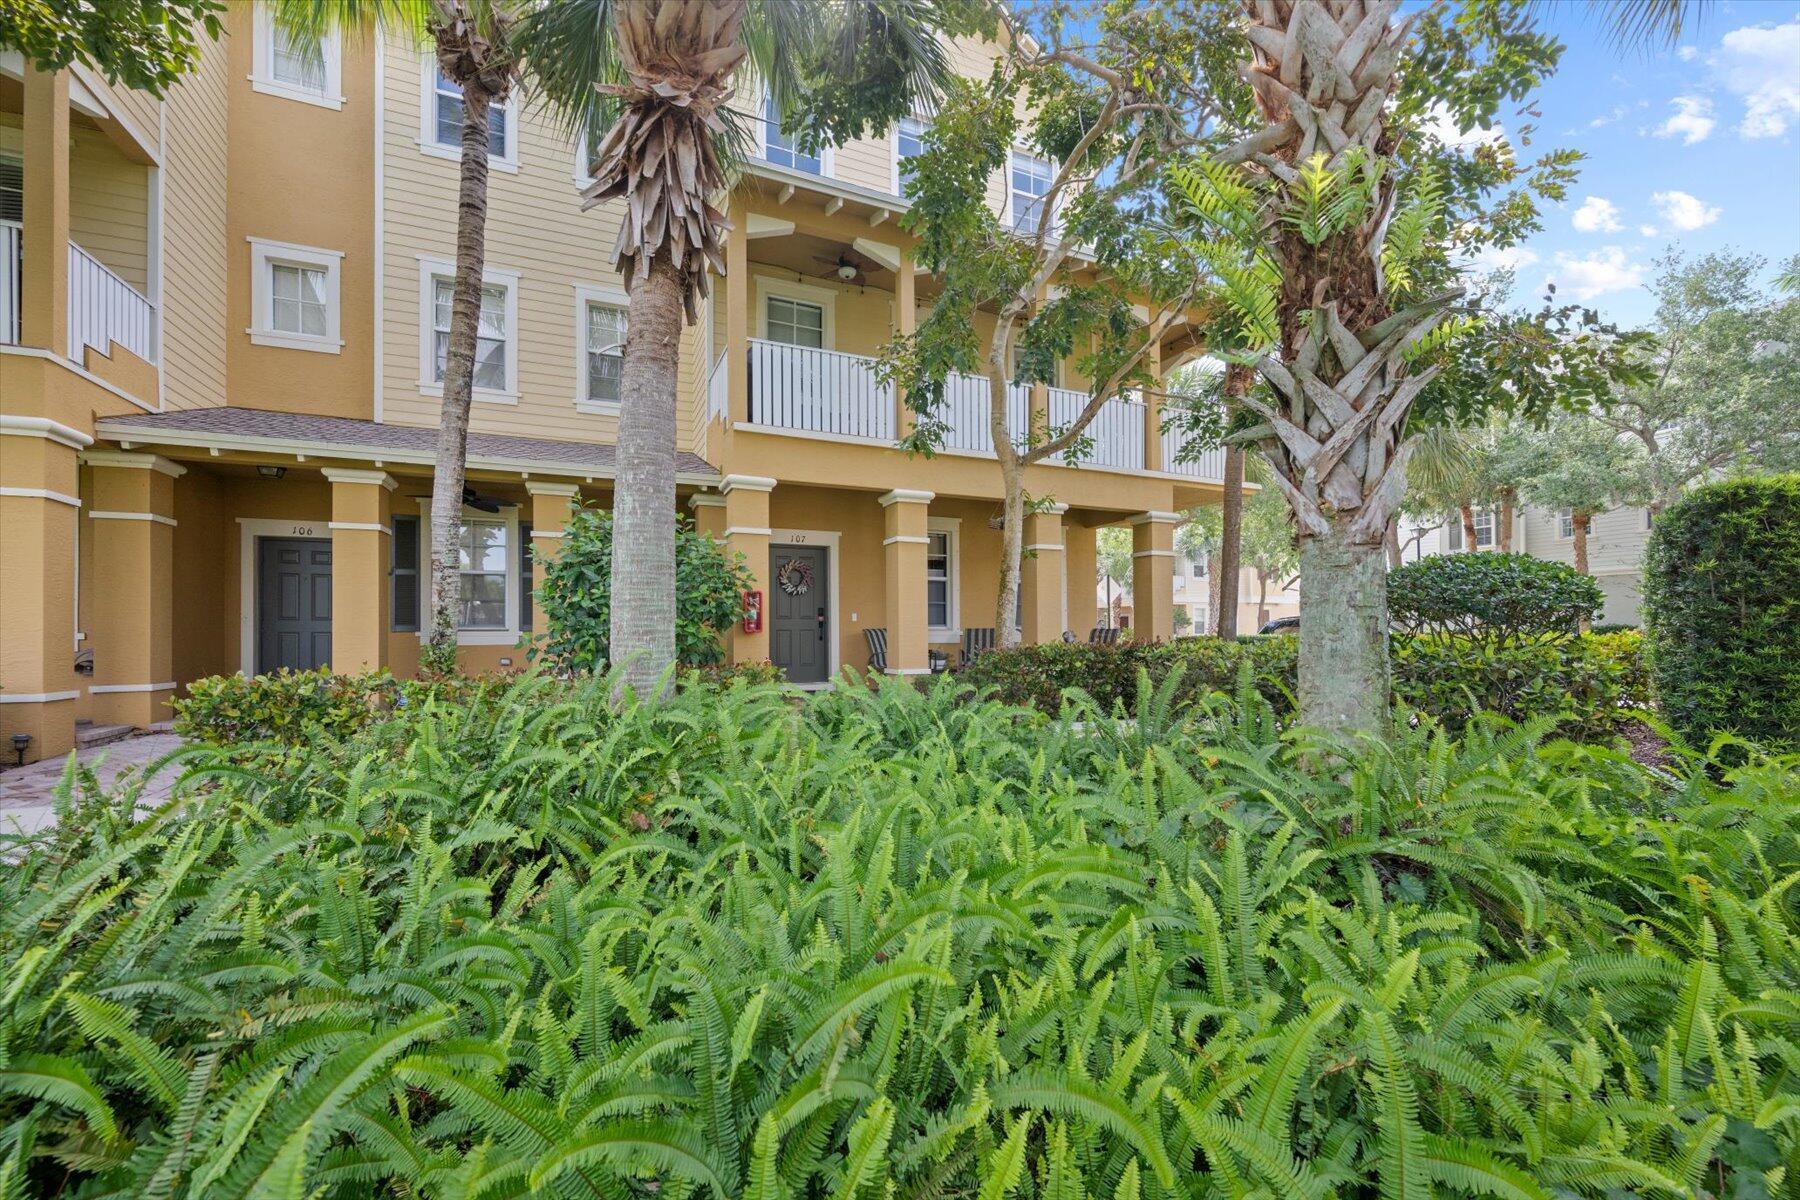 Beautiful, spacious and rarely available corner unit in Sandpiper Cove at Botanica. This home has a large wrap around balcony providing great views and a front patio with plenty of space to enjoy the outdoors. This is a three bedroom home with a den that can be used as a fourth bedroom, two full baths and two half baths. Ceramic tile and bamboo flooring throughout and a two car garage with automatic door opener with camera. Just steps away from Publix, restaurants, shopping and a walking/bicycle nature trail with ponds that offer fresh water fishing. Sandpiper Cove has two heated pools and a cabana.New roof (2022), newer AC (2017), hot water heater (2020). Great location near Jupiter Medical Center, Jupiter and Juno beaches, public and private golf courses and Jupiter schools